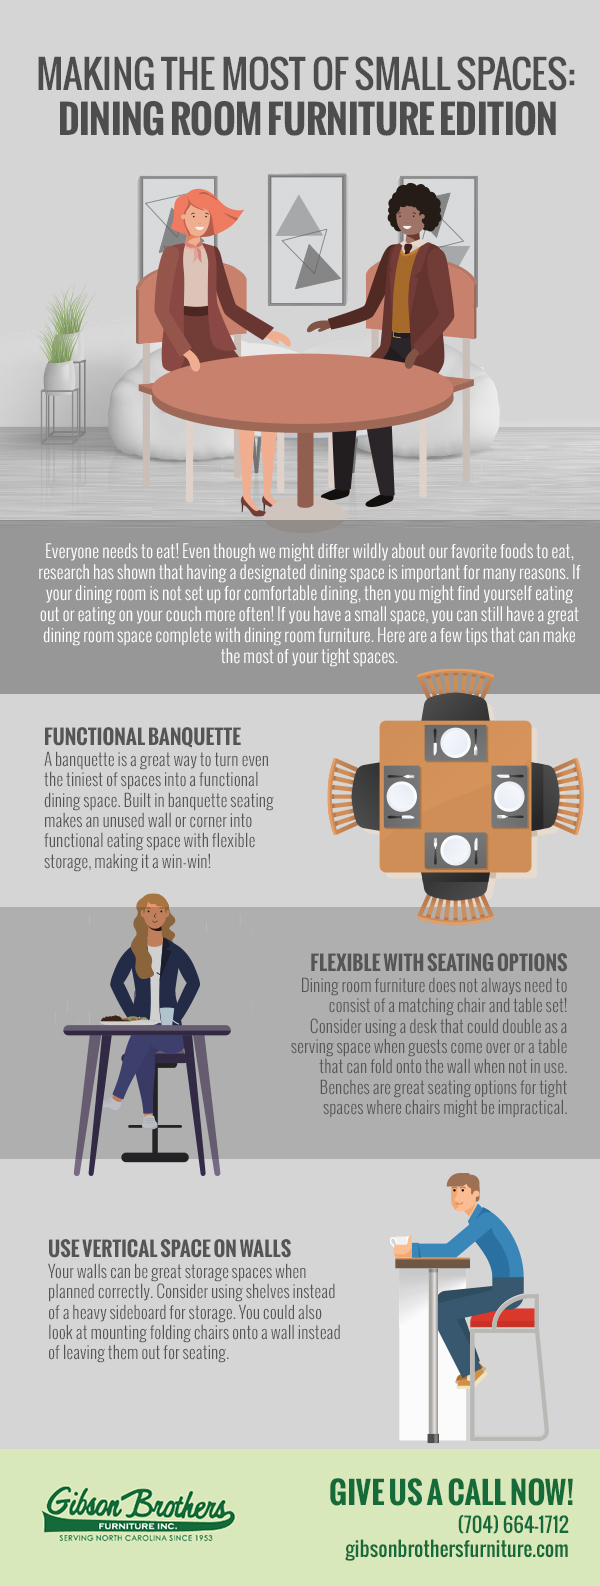 Making the Most of Small Spaces: Dining Room Furniture Edition [infographic]